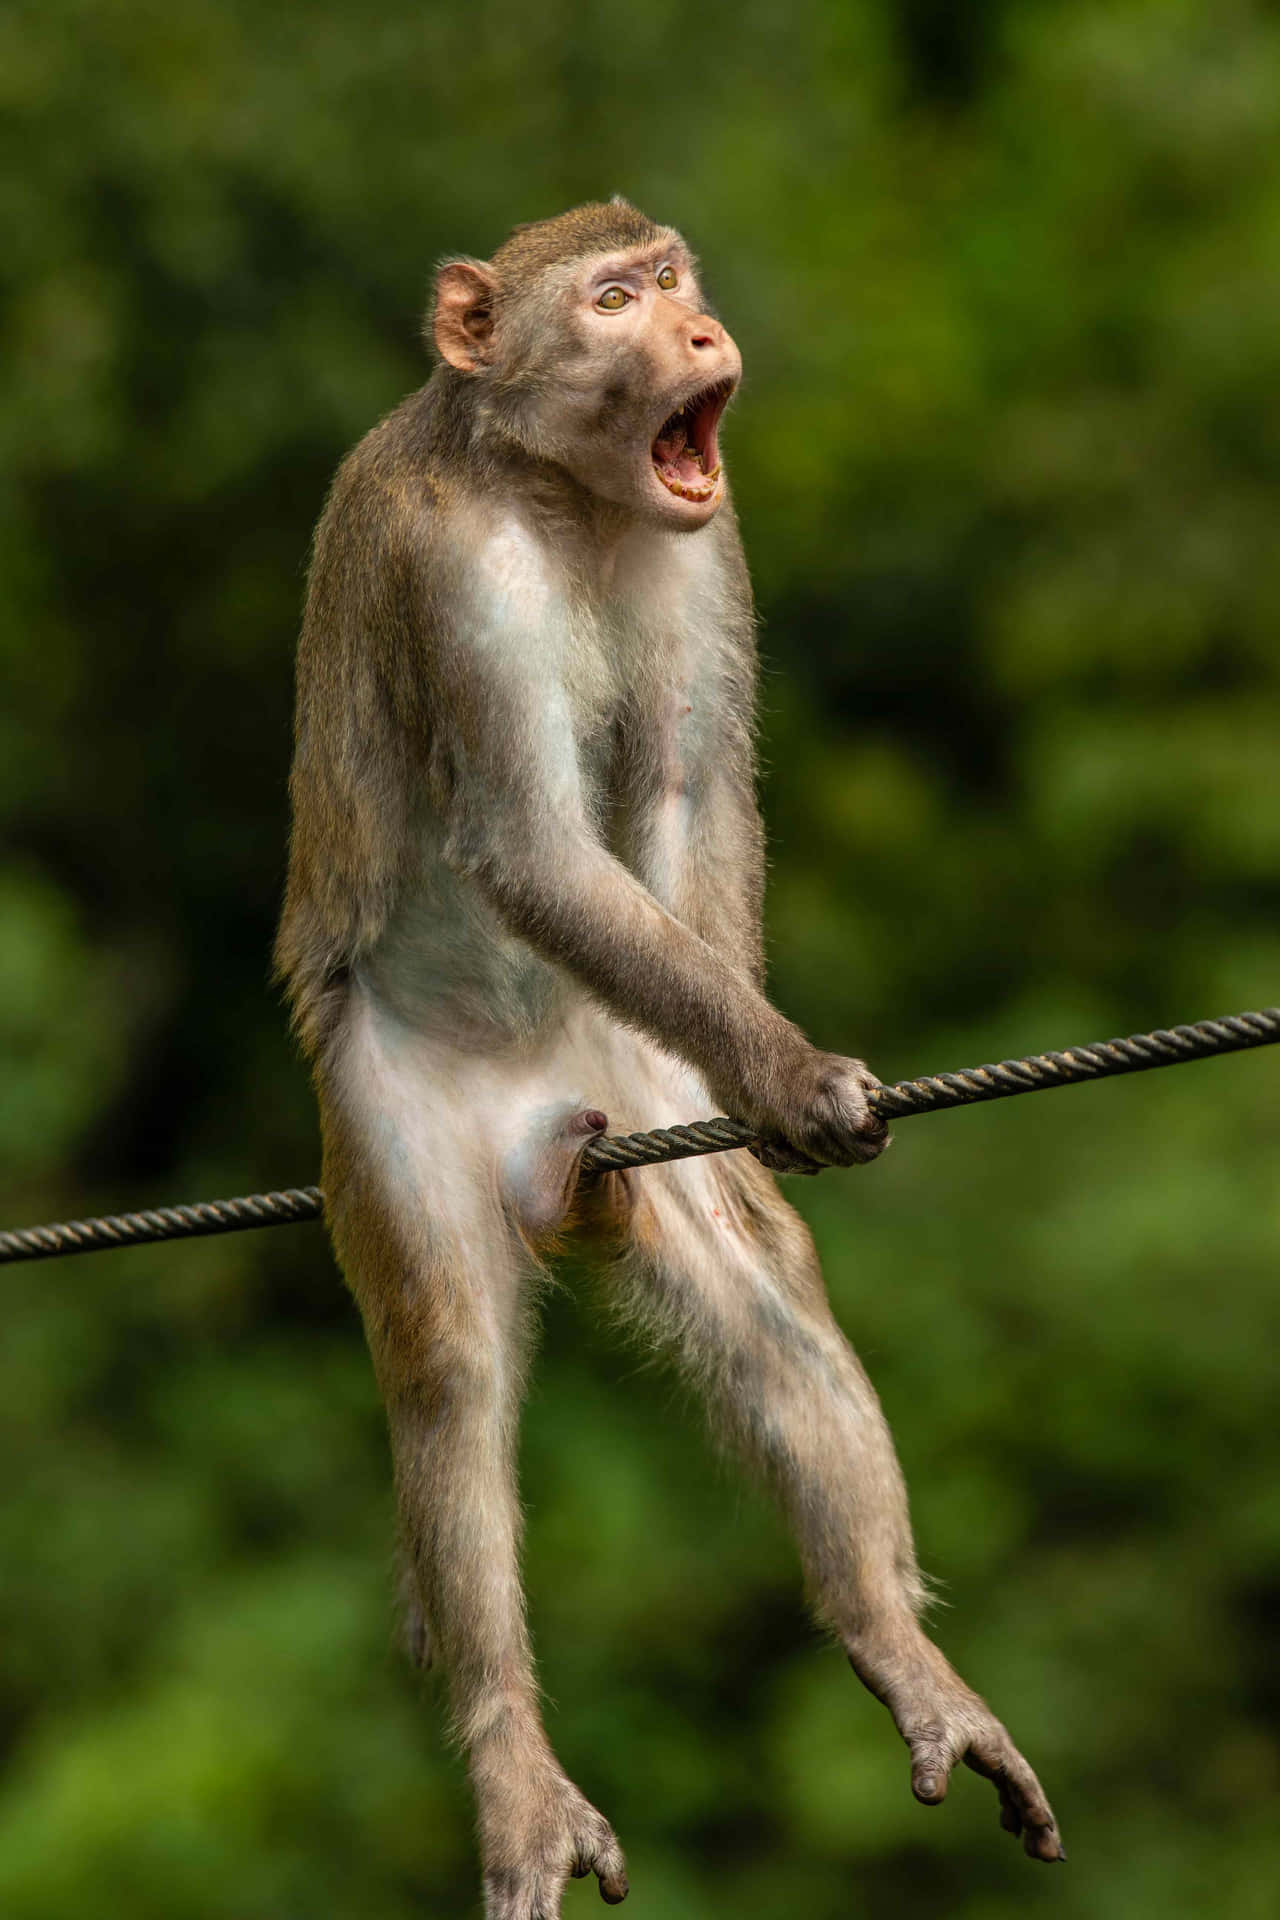 Funny Animal Screaming Monkey On Branch Pictures